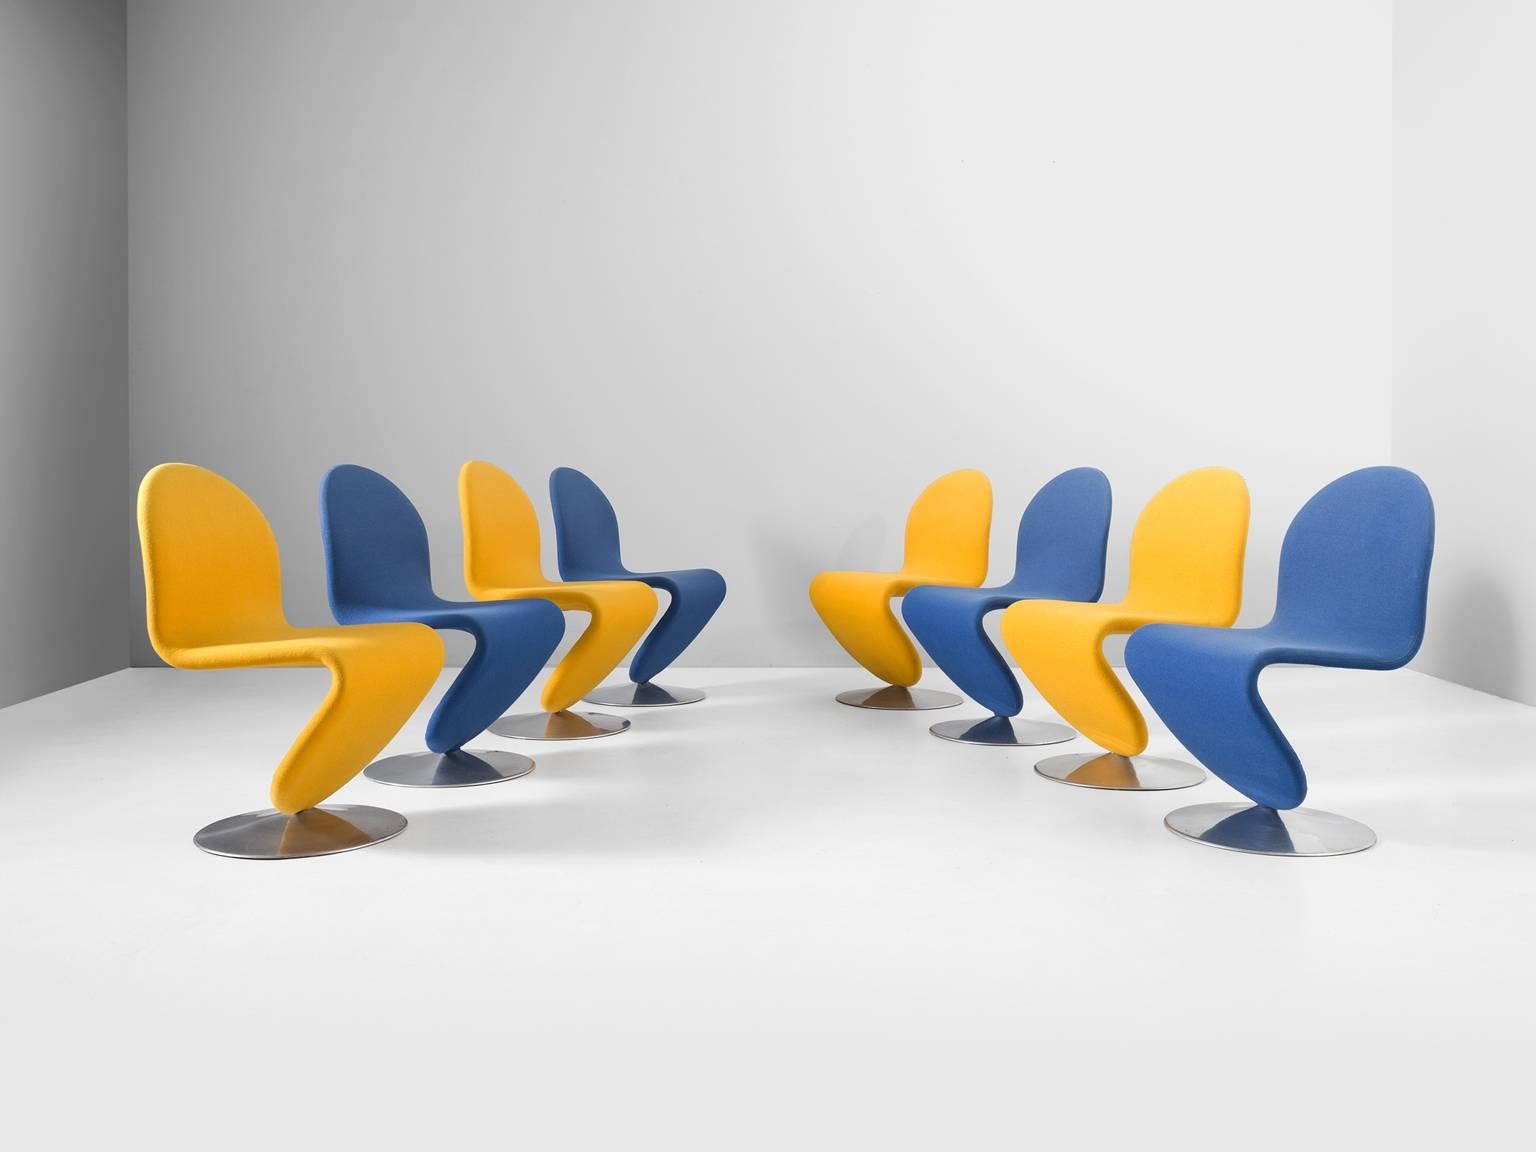 Set of eight dining chairs 'system 1-2-3', in metal and fabric, by Verner Panton for Fritz Hansen, Denmark, 1973.

Set of eight side chairs model 'Chair A' from the 1-2-3 series of Danish designer Verner Panton. Panton is known for his organic and